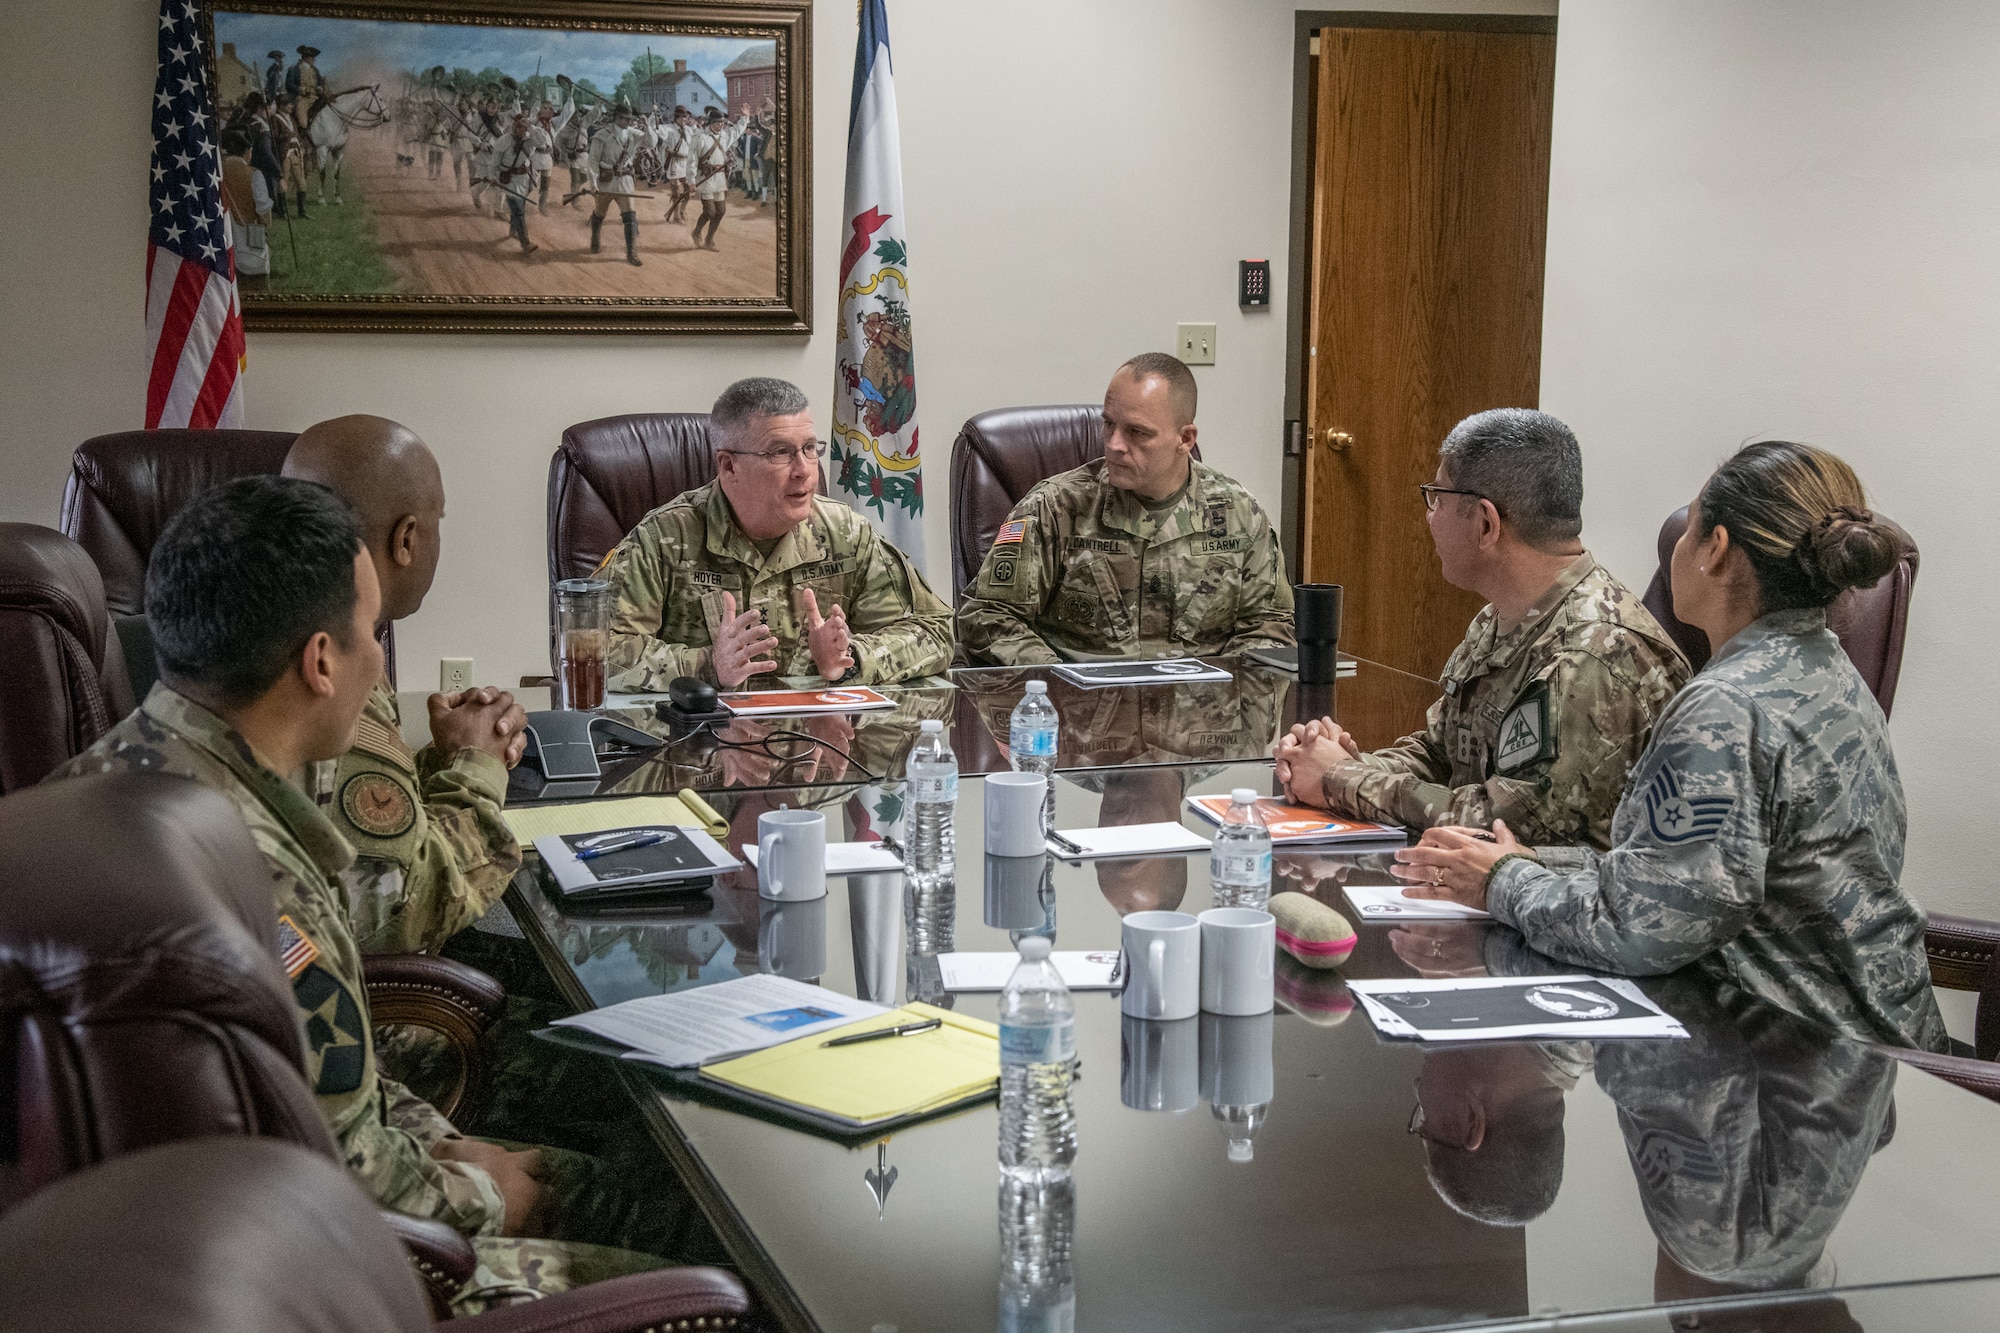 Maj. Gen. James Hoyer, Adjutant General of the West Virginia National Guard, speaks with Maj. Gen. Mario E. Risco, Defense and Military Attaché to the Embassy of Peru in Washington, D.C., during a State Partnership Program (SPP) visit.